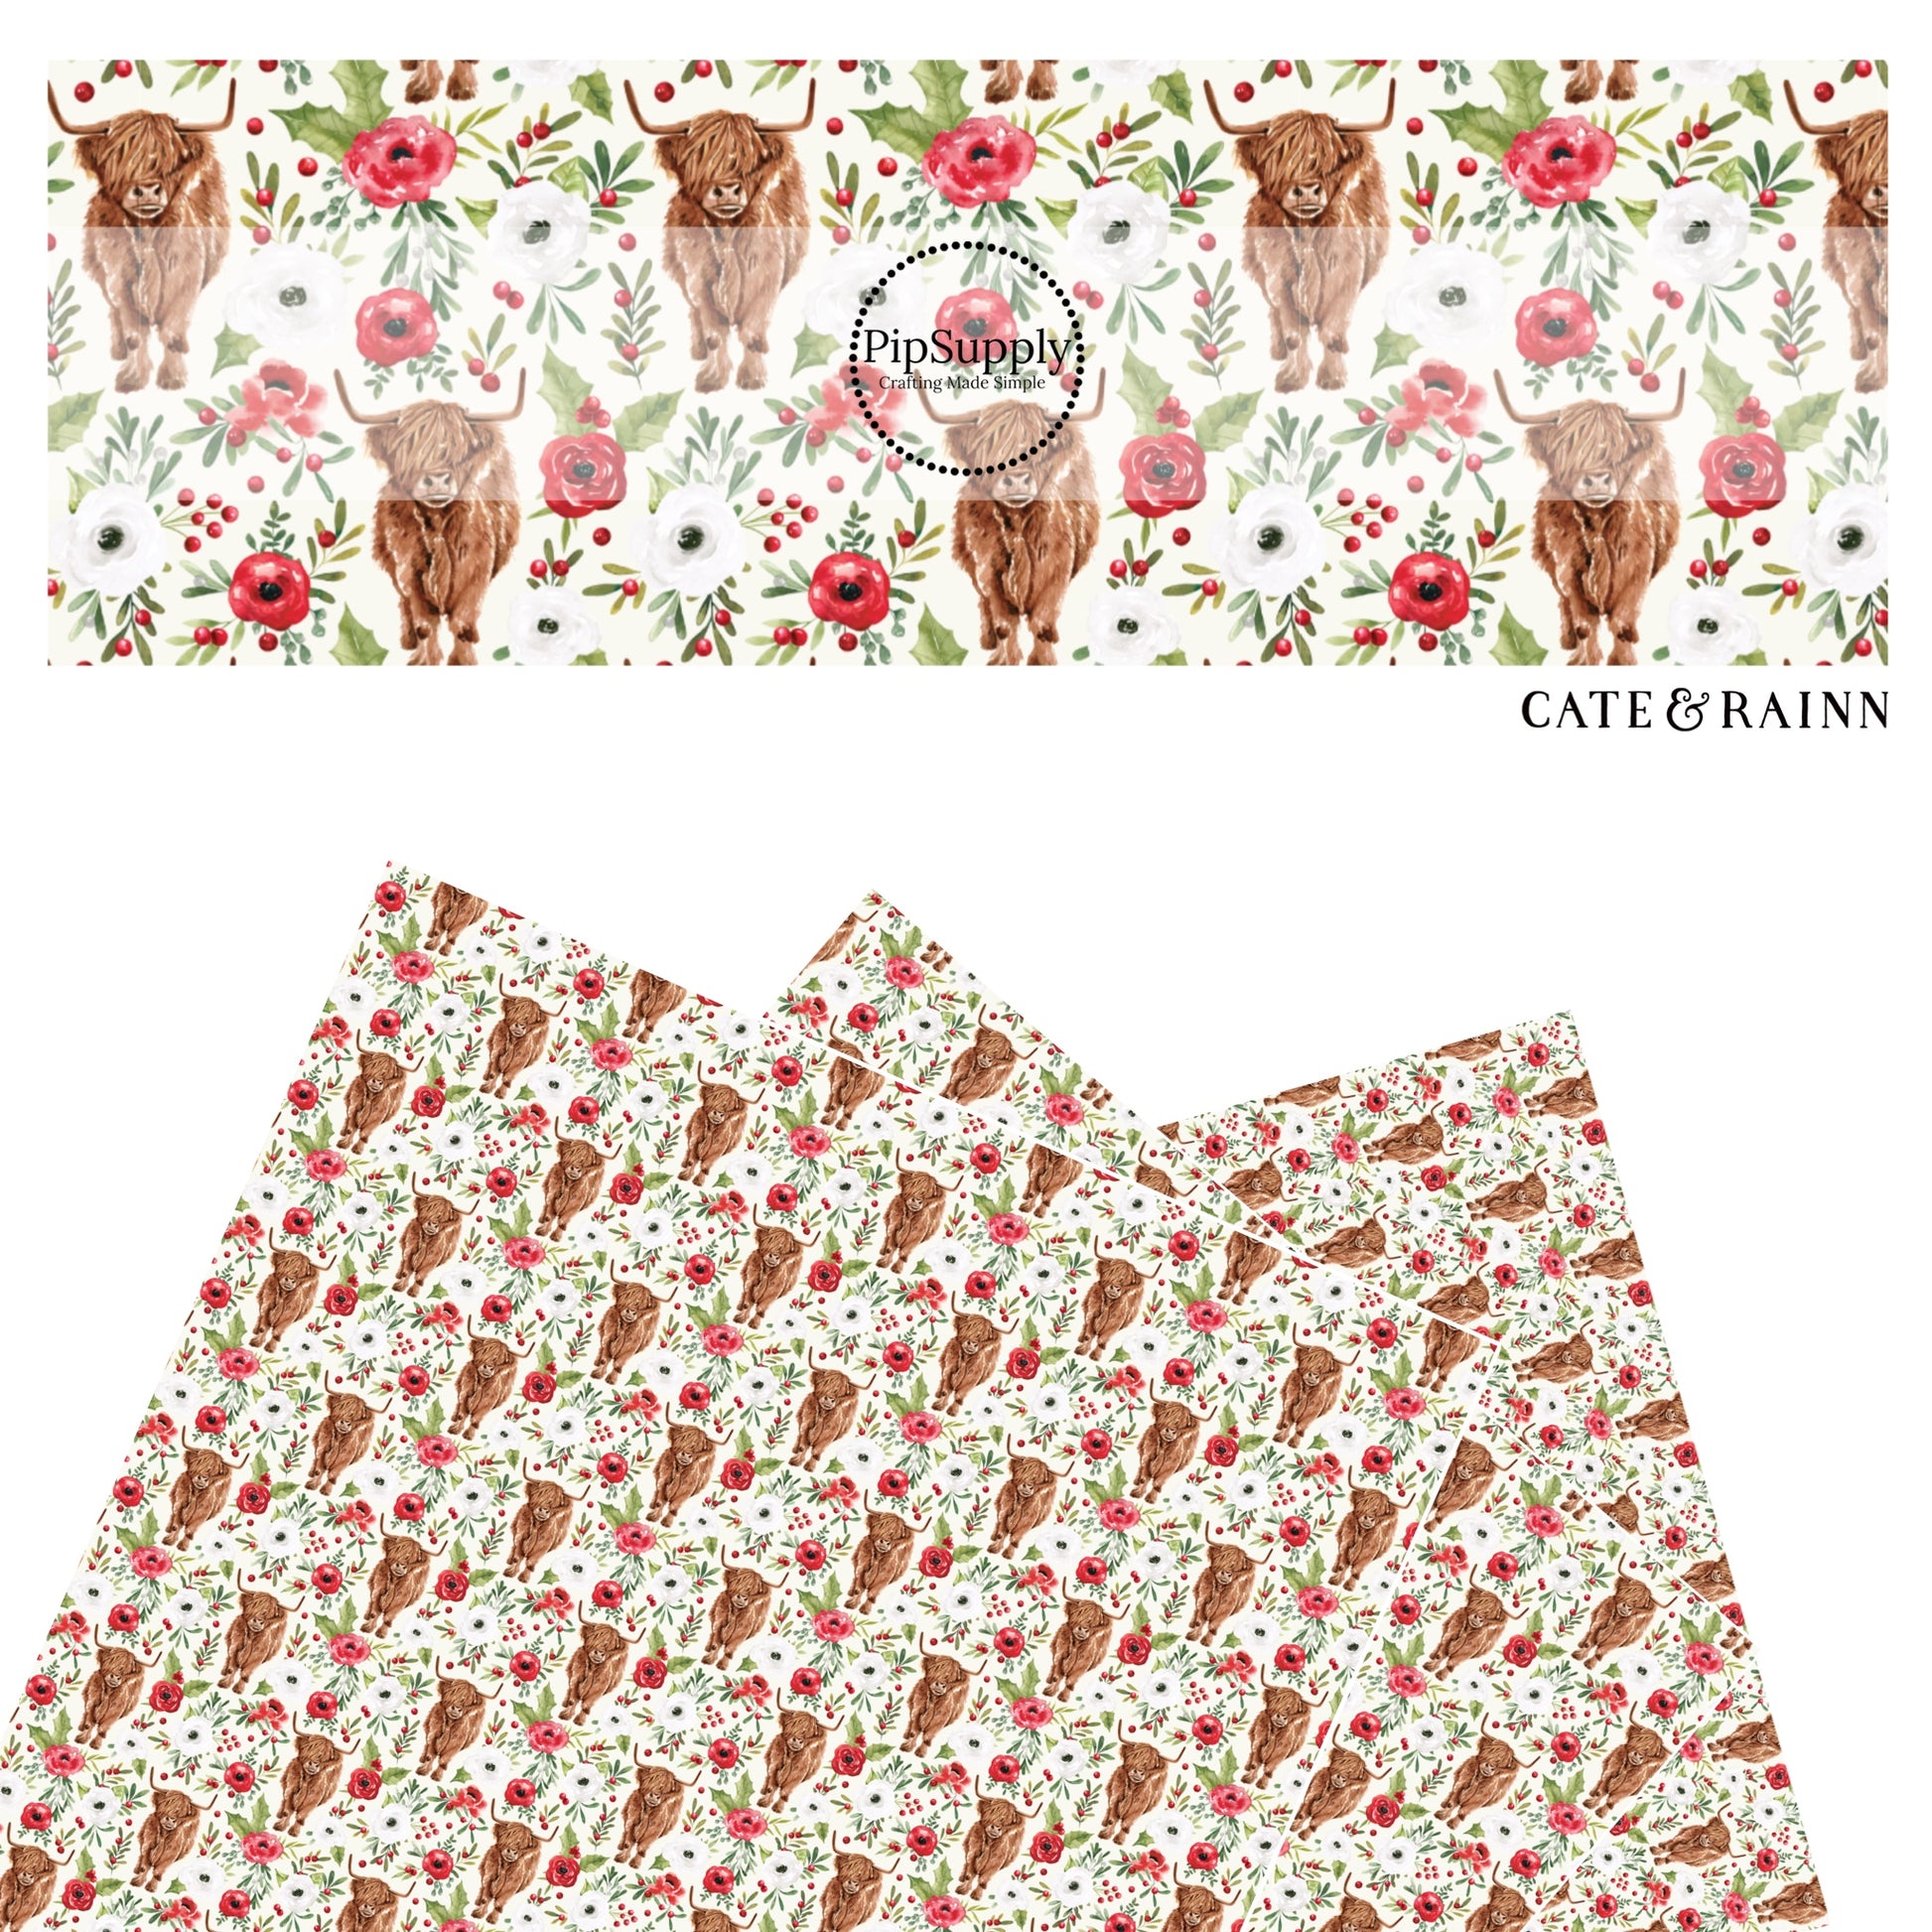 Brown cows with red, green, and white florals on white faux leather sheets